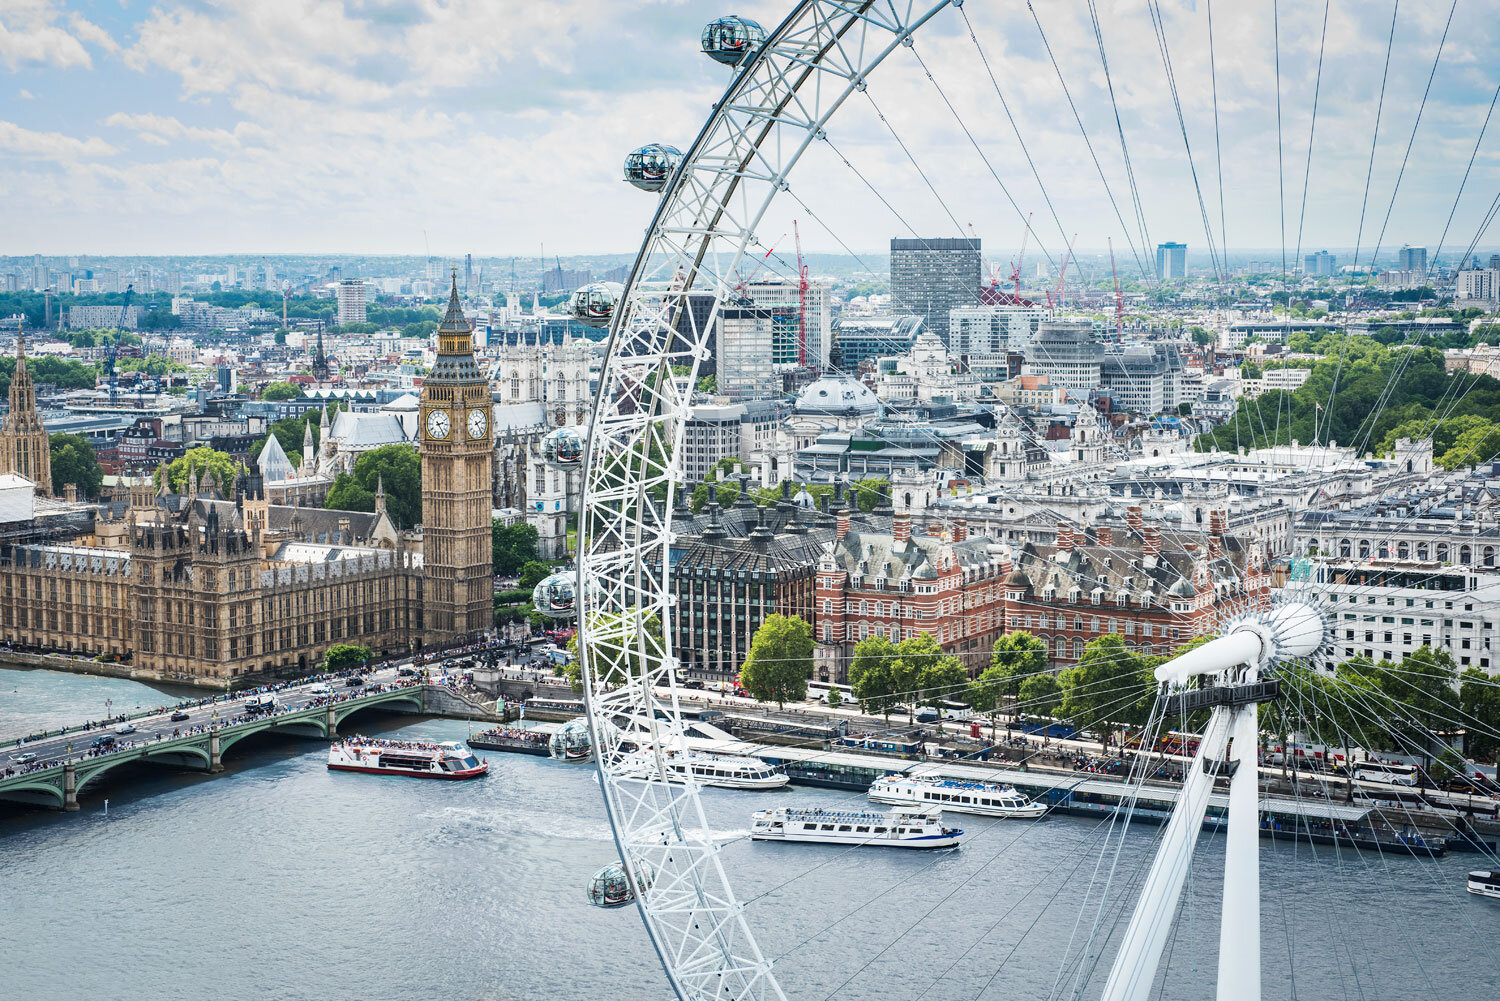  View of the River Thames with London Eye, Houses of Parliament and river boats.  Photograph by Eleanor Bentall 